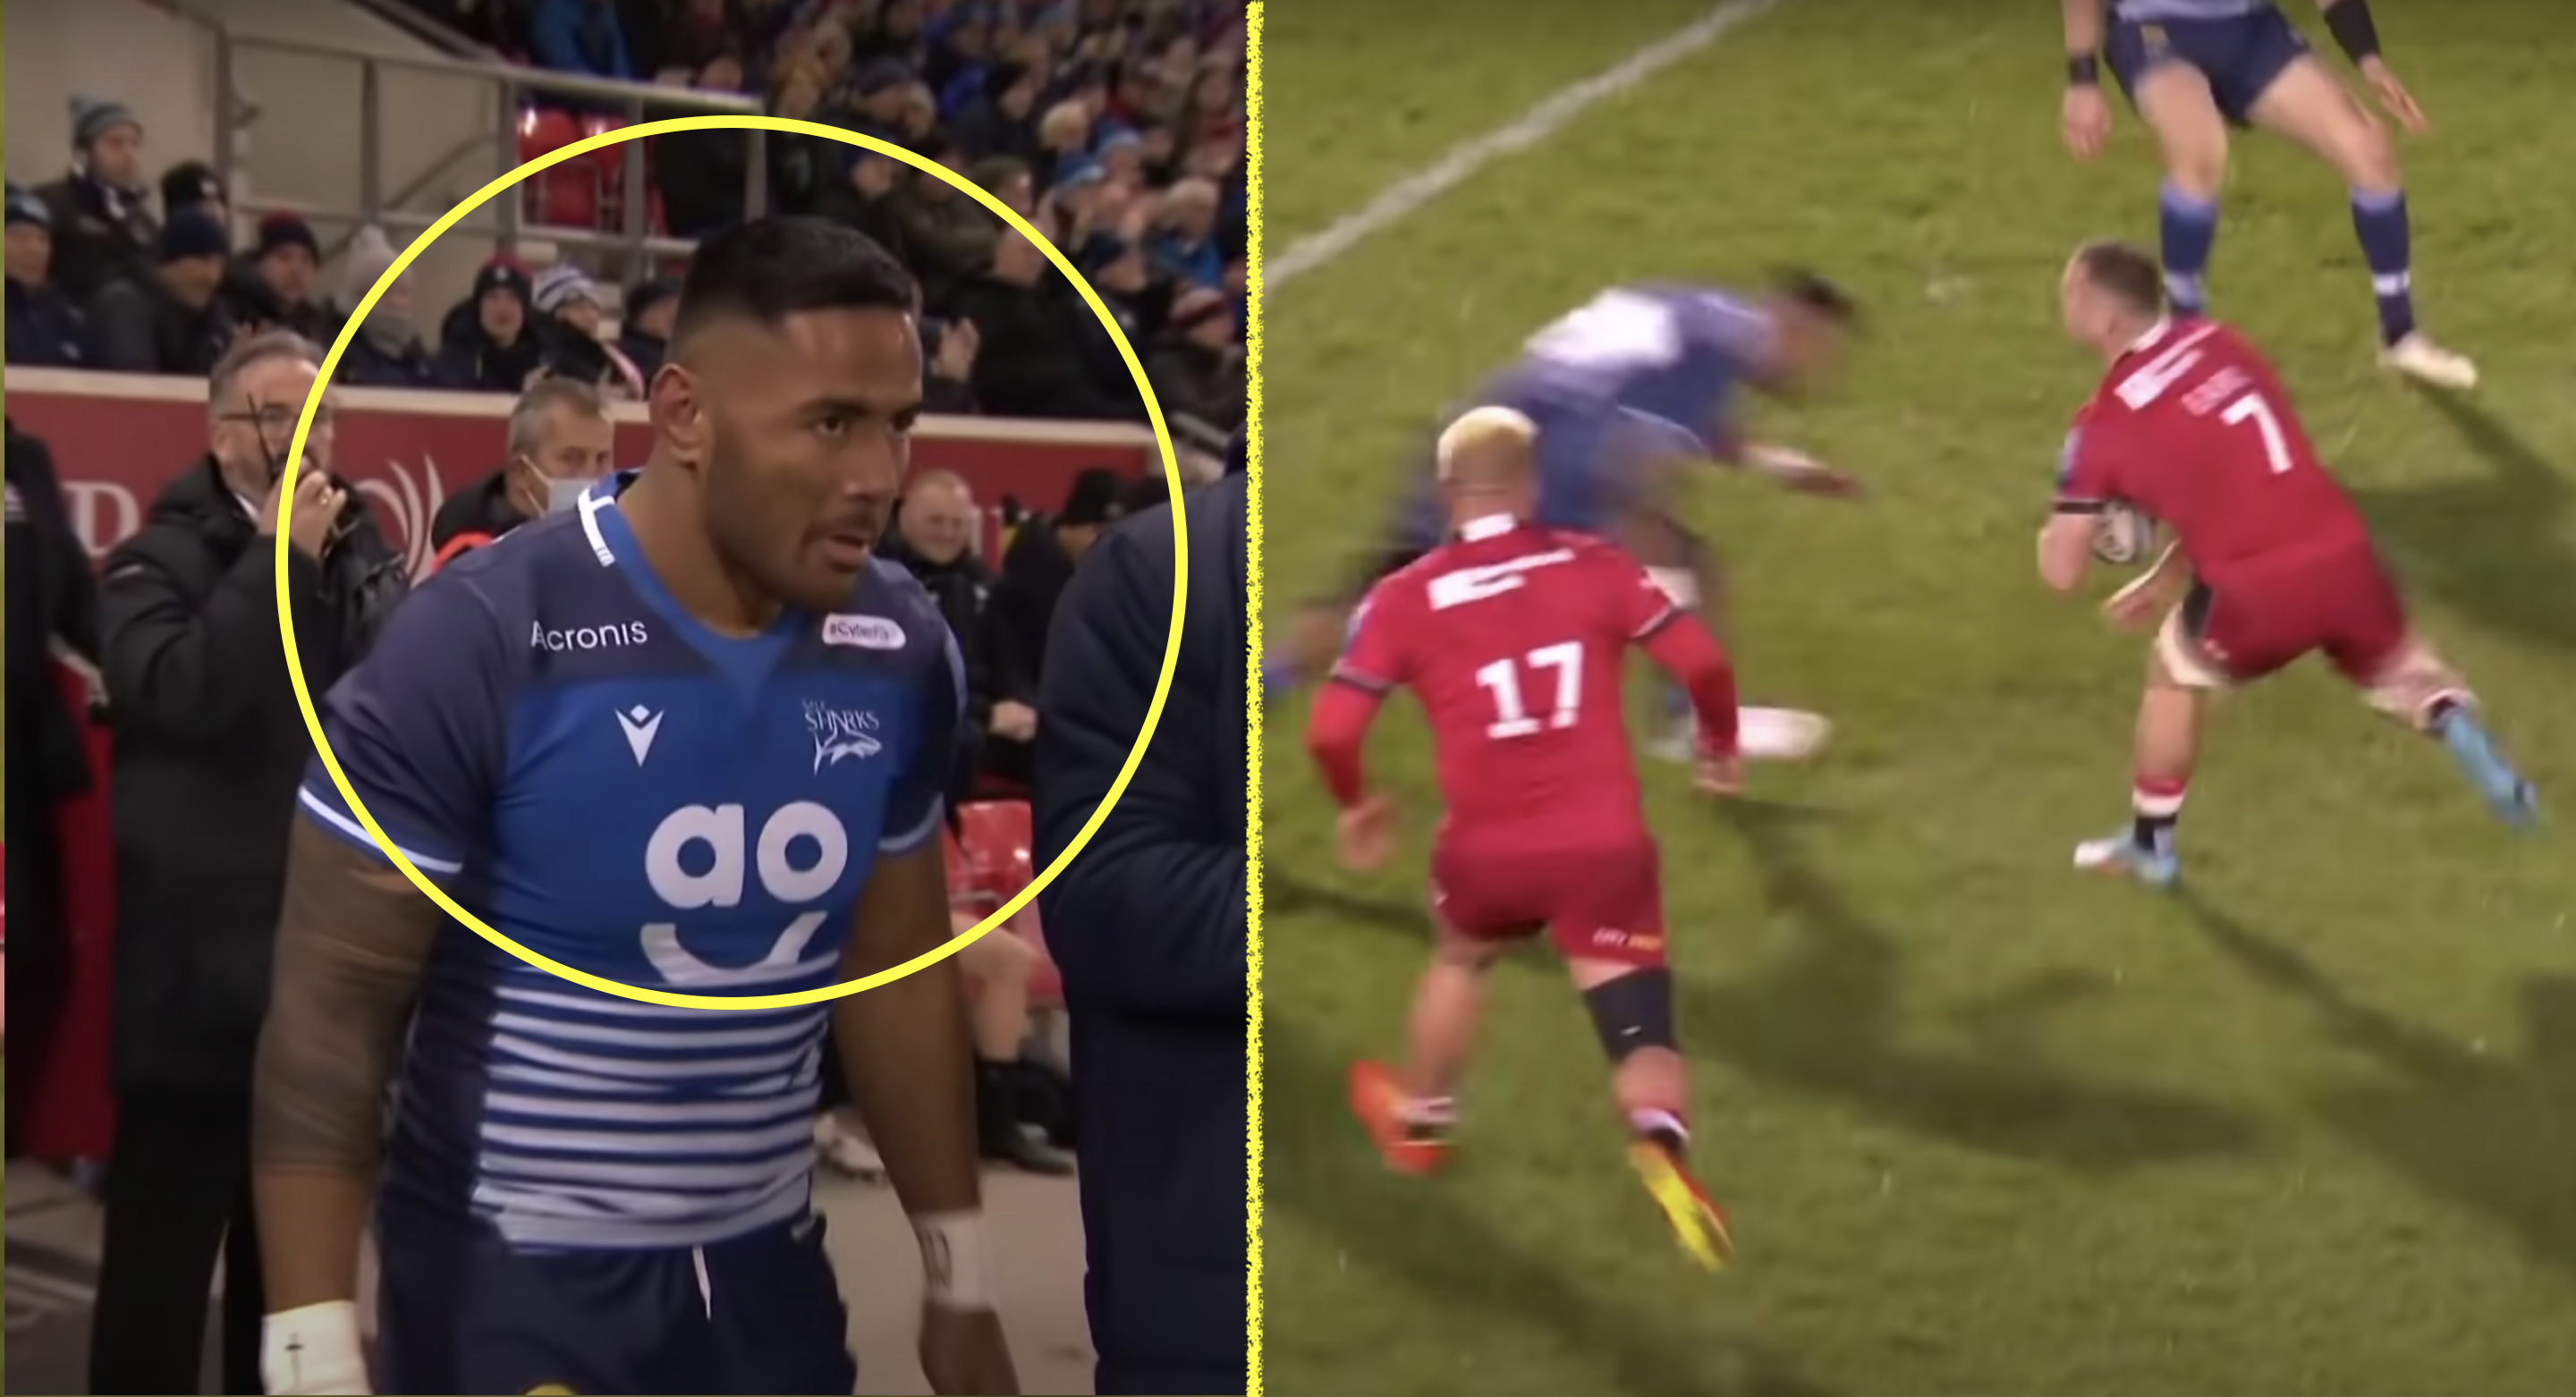 Tuilagi lines up monster hit but unbelievably gets swatted away by England pariah